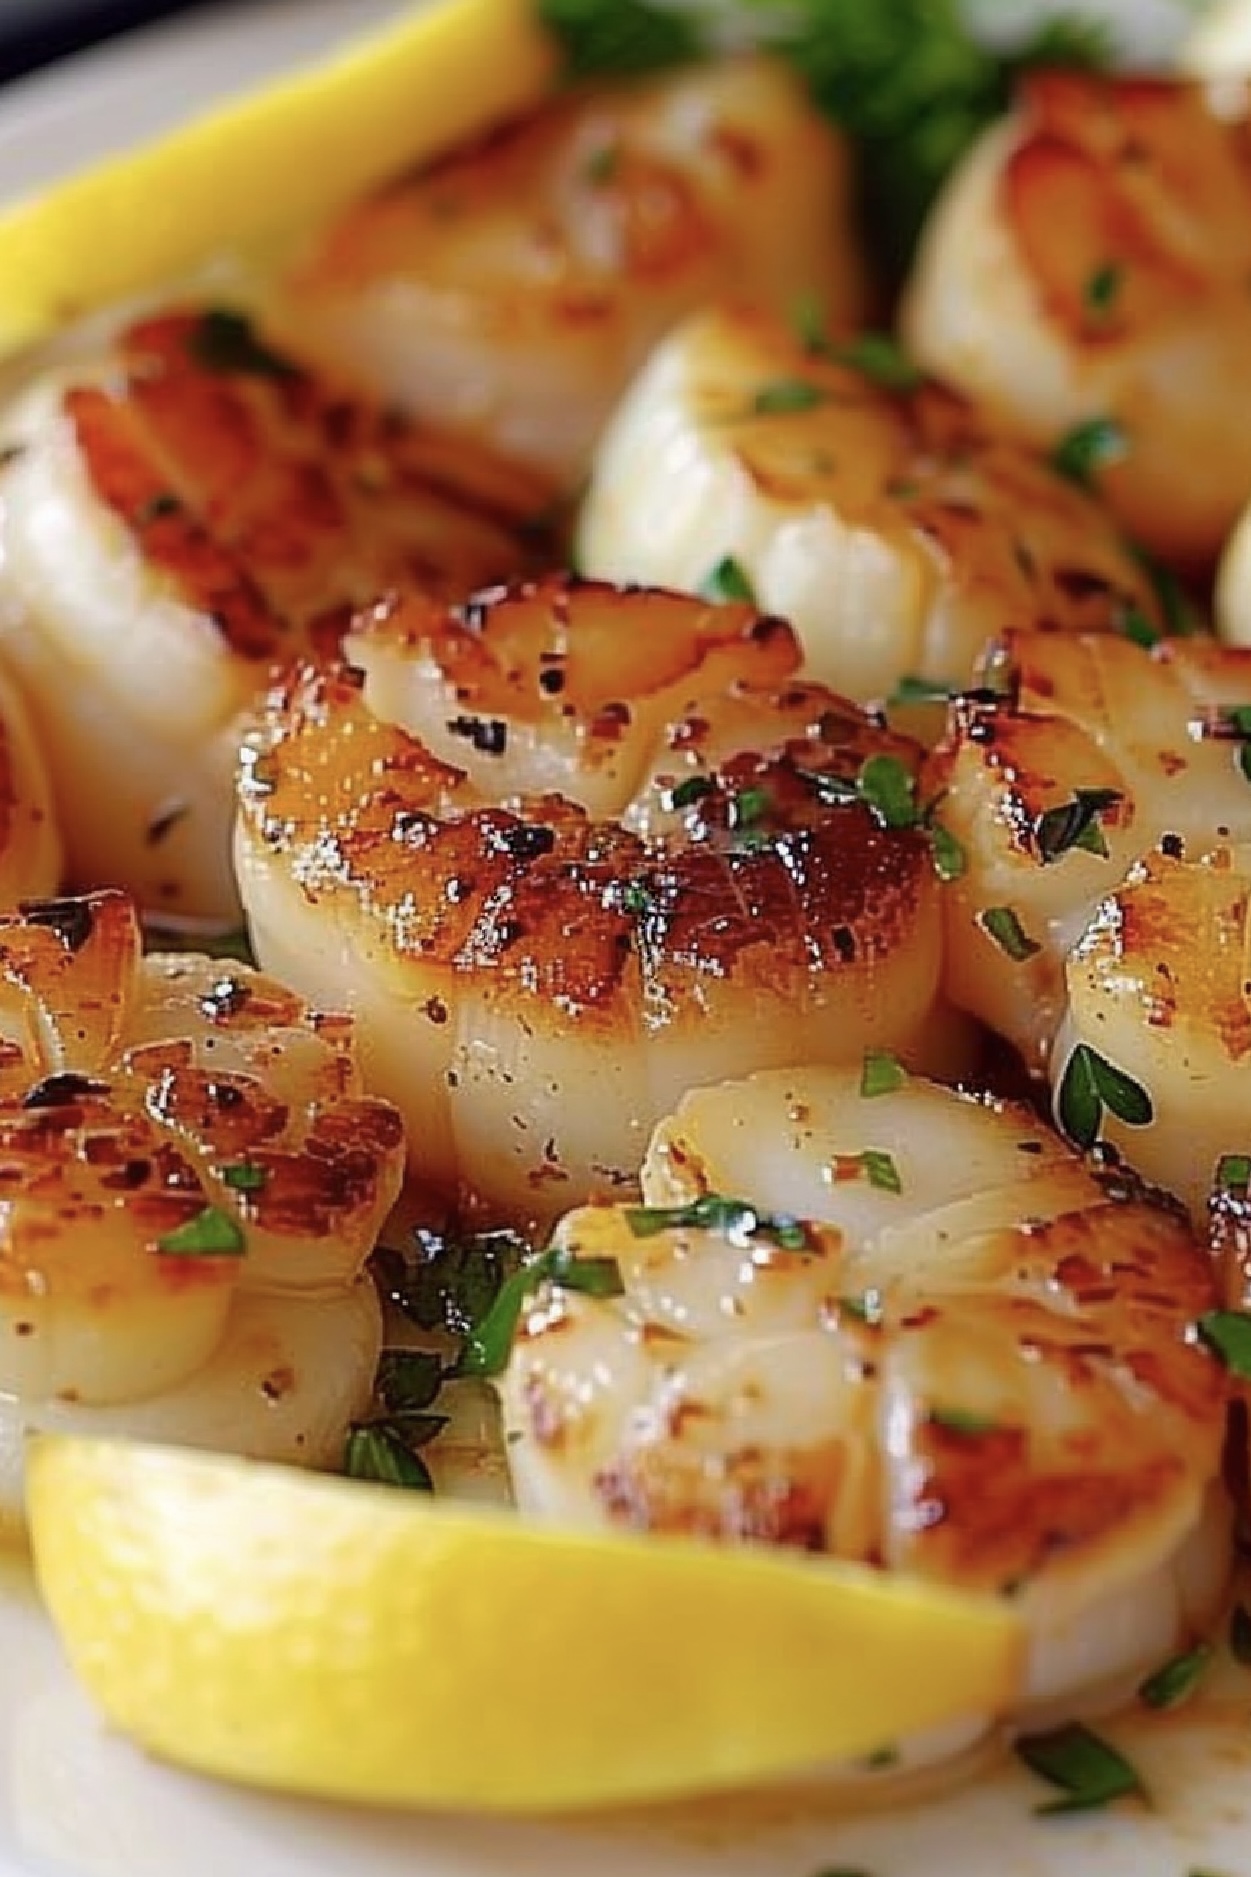 Need a quick yet elegant dinner idea? Try our Broiled Scallops recipe and indulge in a taste of gourmet luxury at home.